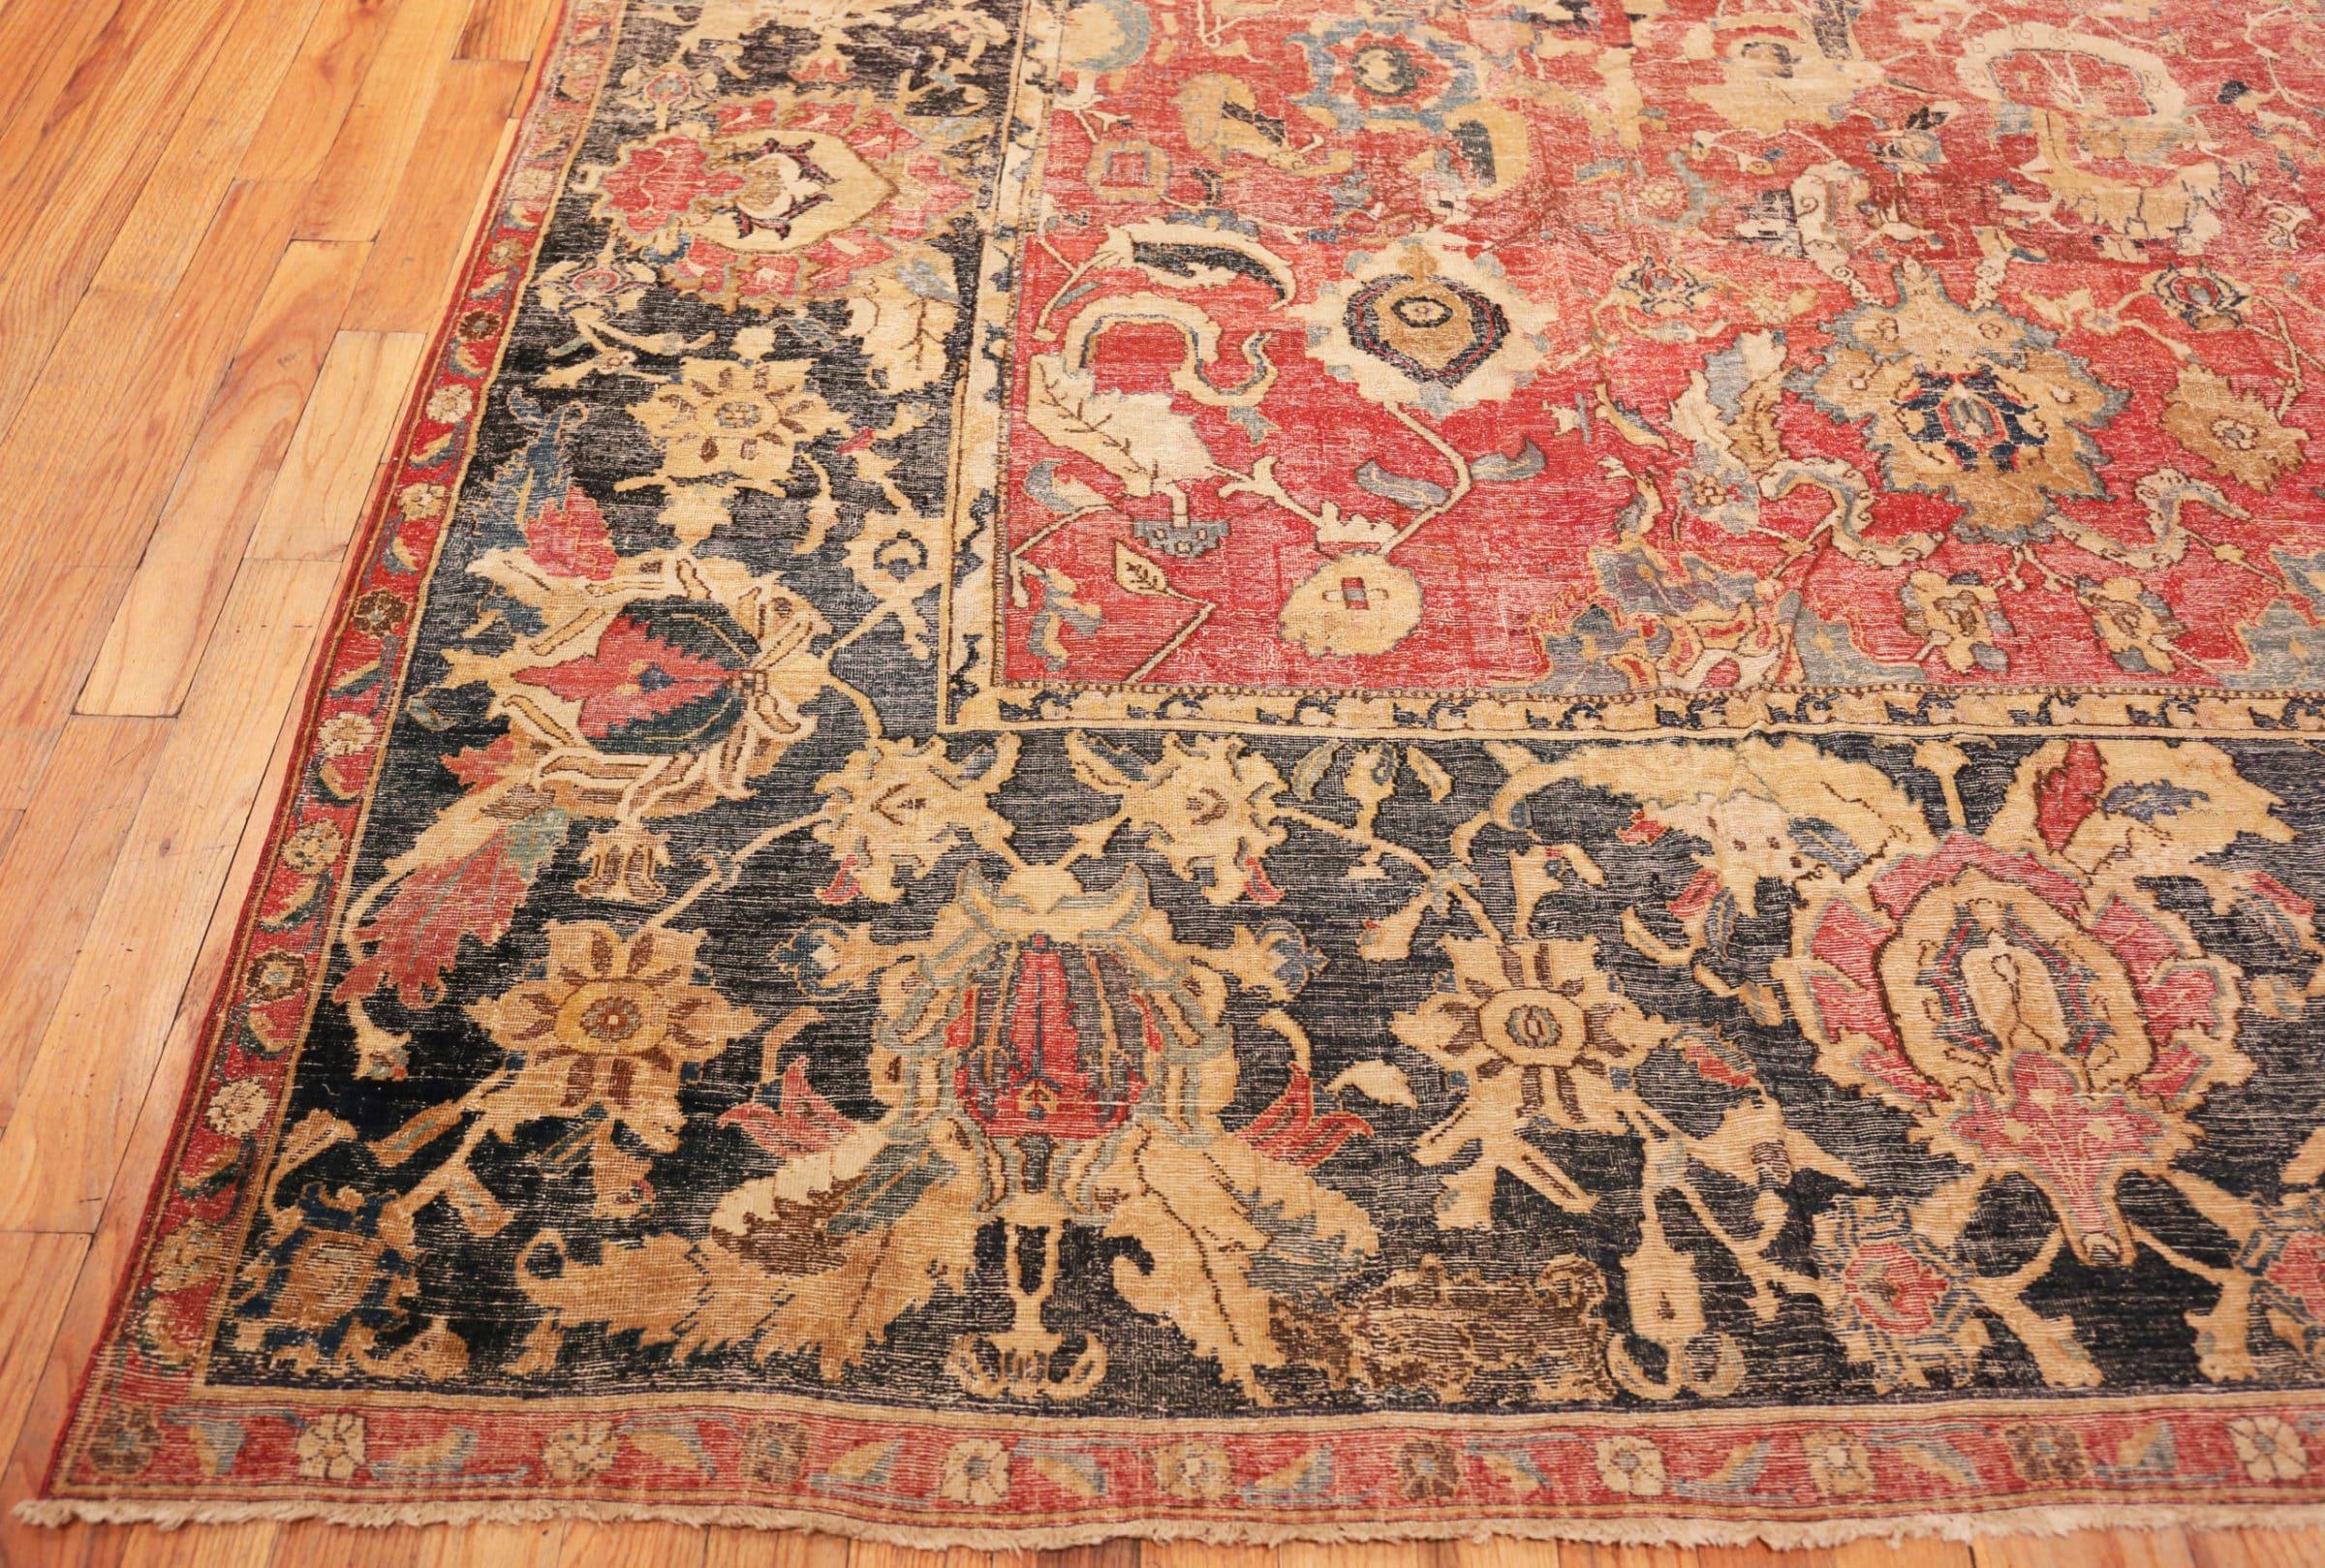 Wool 17th Century Persian Esfahan Rug. Size: 11 ft 4 in x 30 ft For Sale